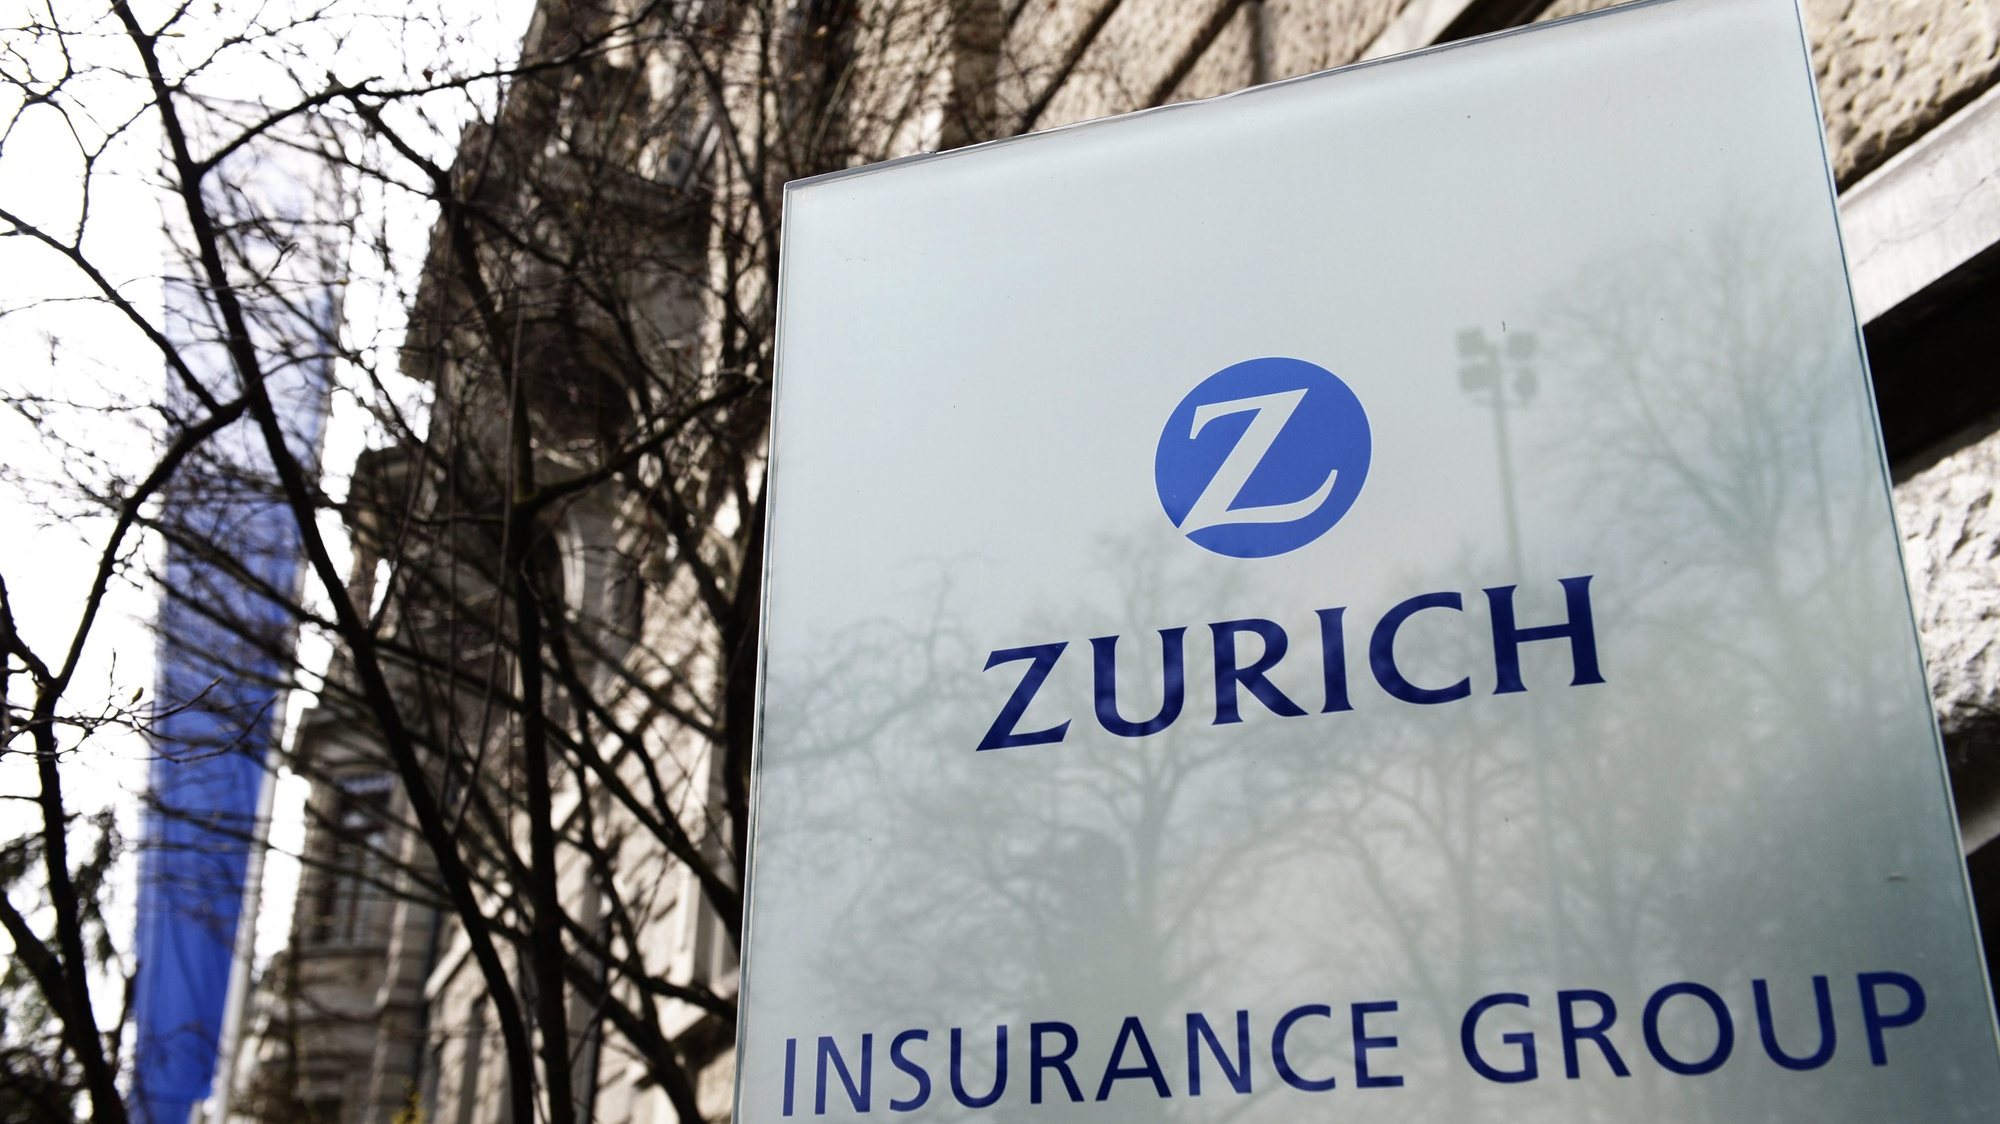 epa04120105 The Logo of Zurich Insurance Group, pictured 11 March 2014 in Zurich, Switzerland. The Swiss Insurance company Zurich today announced plans to cut about 800 jobs globally by the end of 2015.  EPA/STEFFEN SCHMIDT